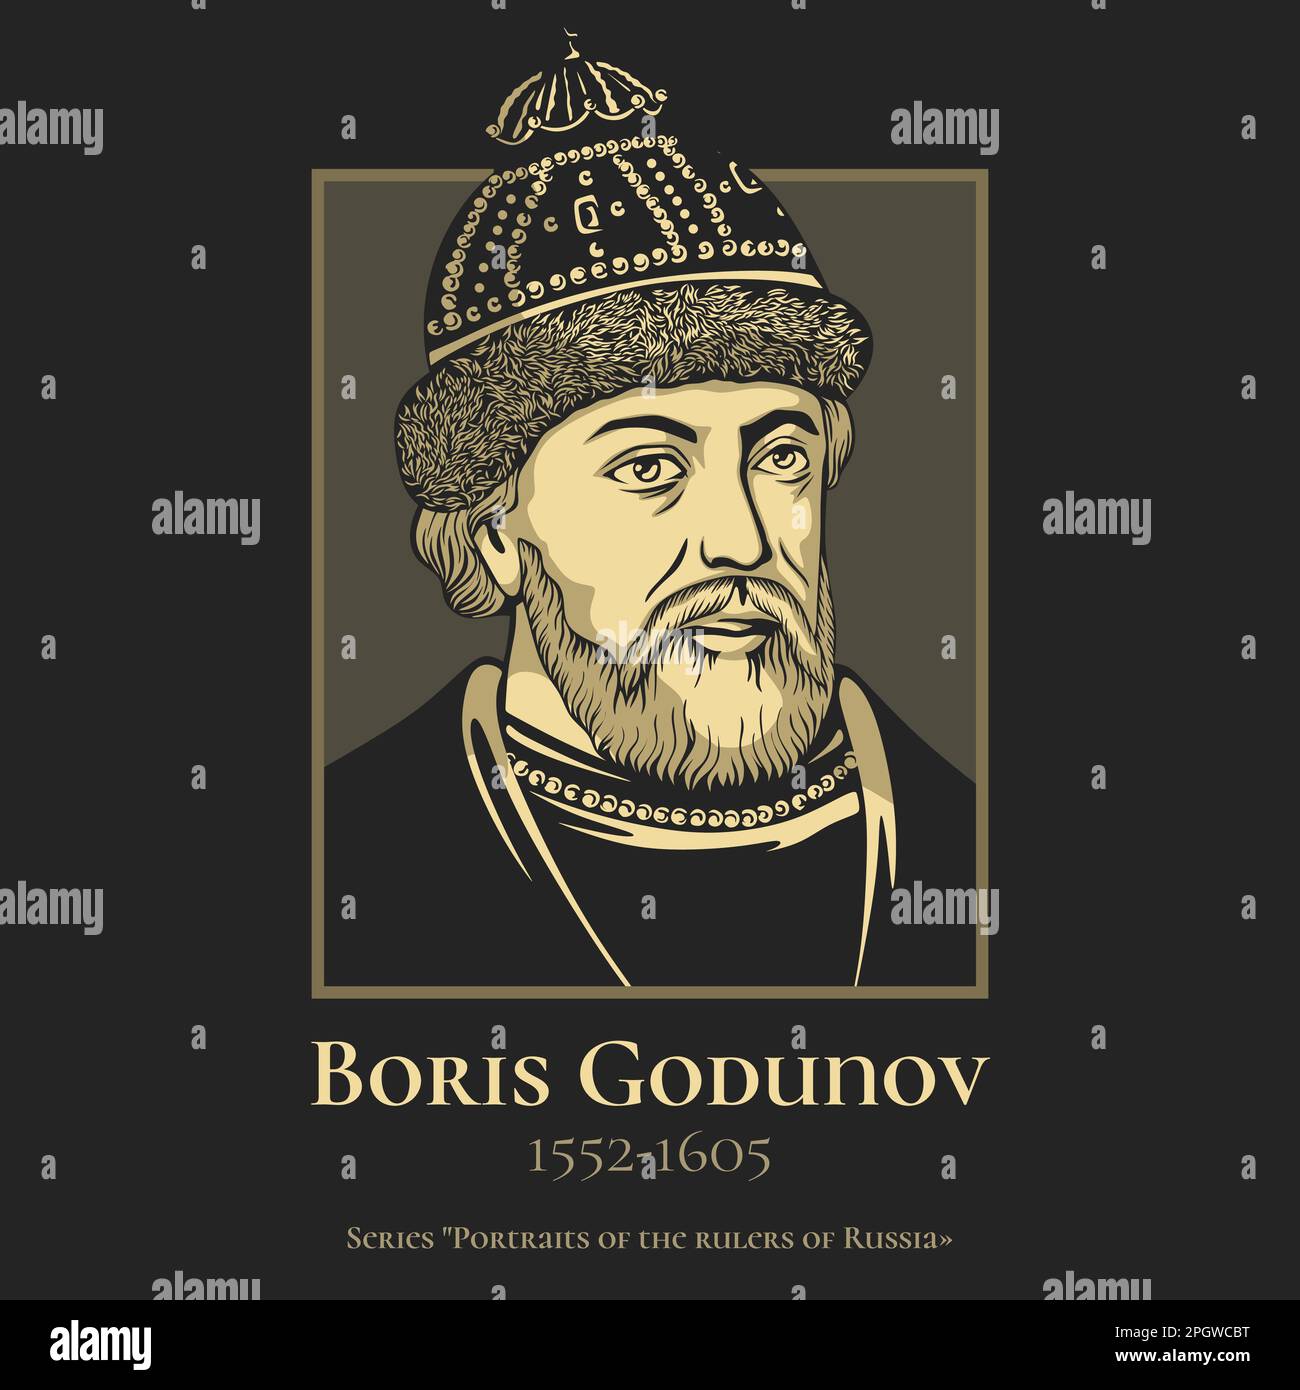 Boris Fyodorovich Godunov (1552-1605) ruled the Tsardom of Russia as de facto regent from c. 1585 to 1598 and then as the first non-Rurikid tsar Stock Vector